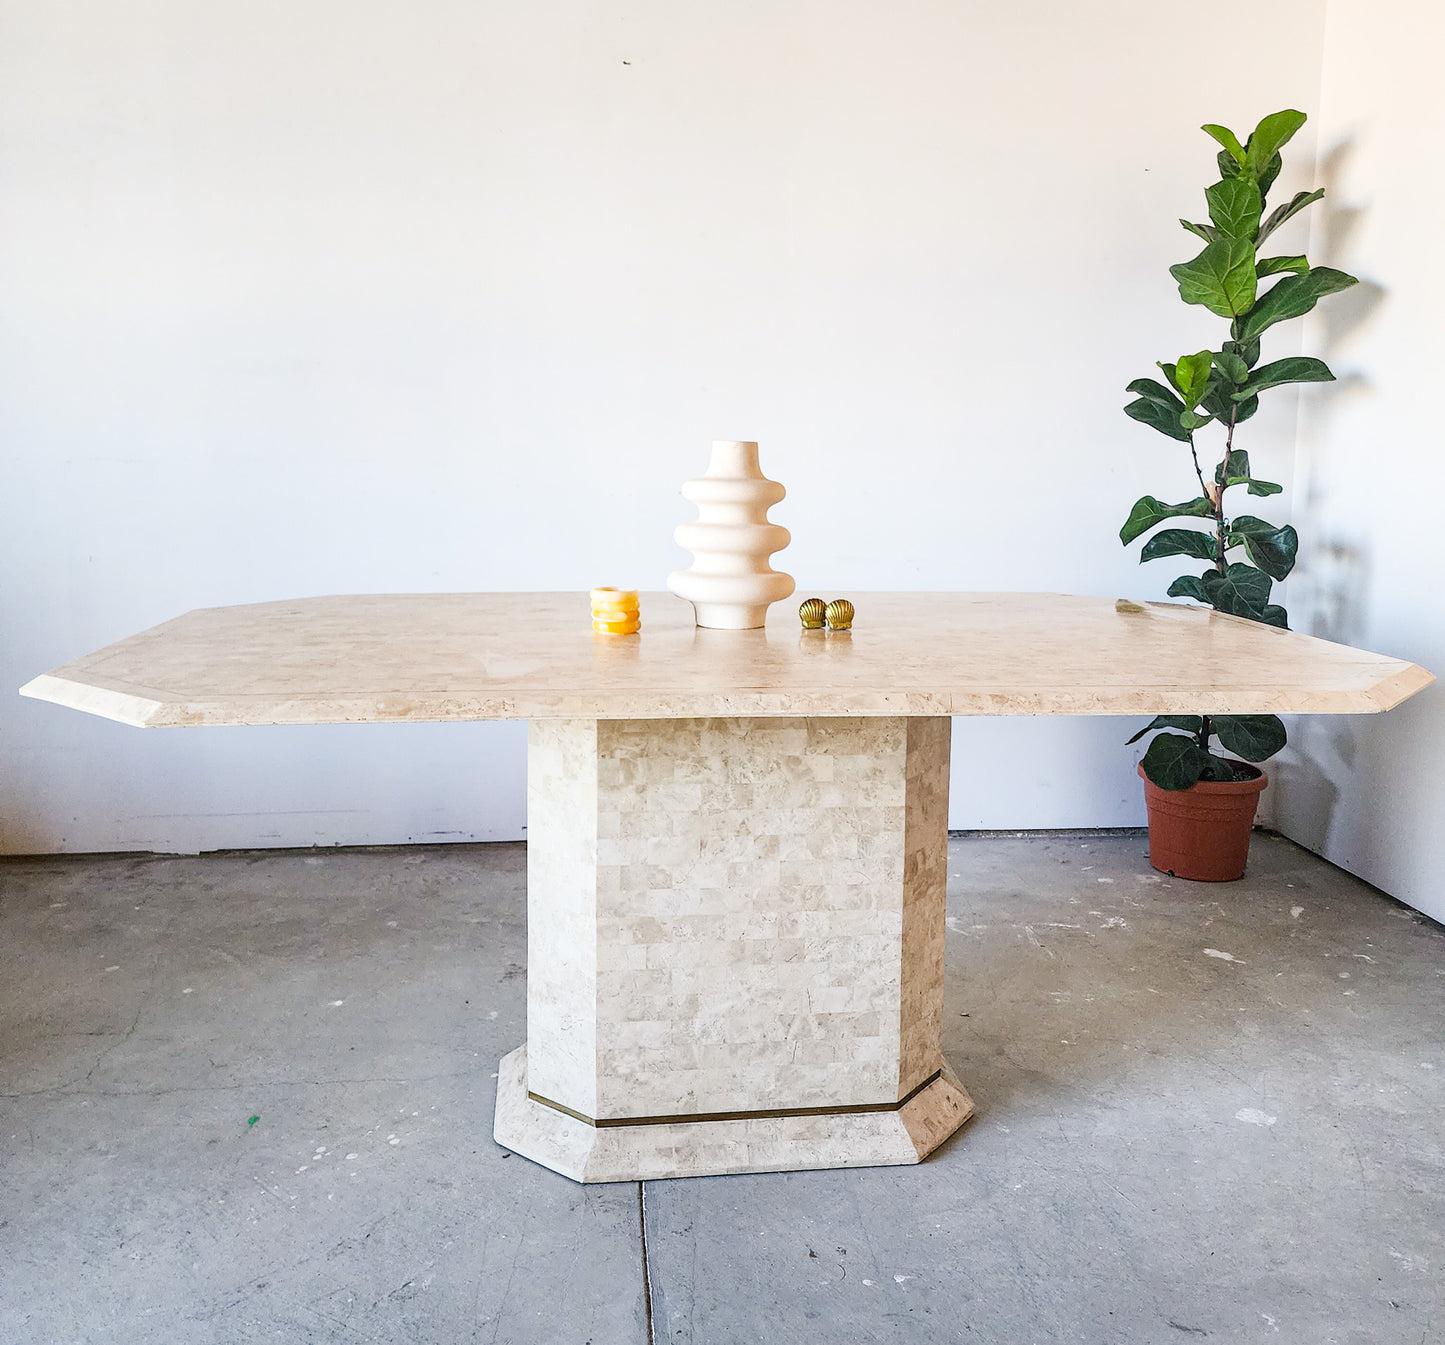 Postmodern Tessellated Stone Dining Table - Reclaimed Mt. Goods